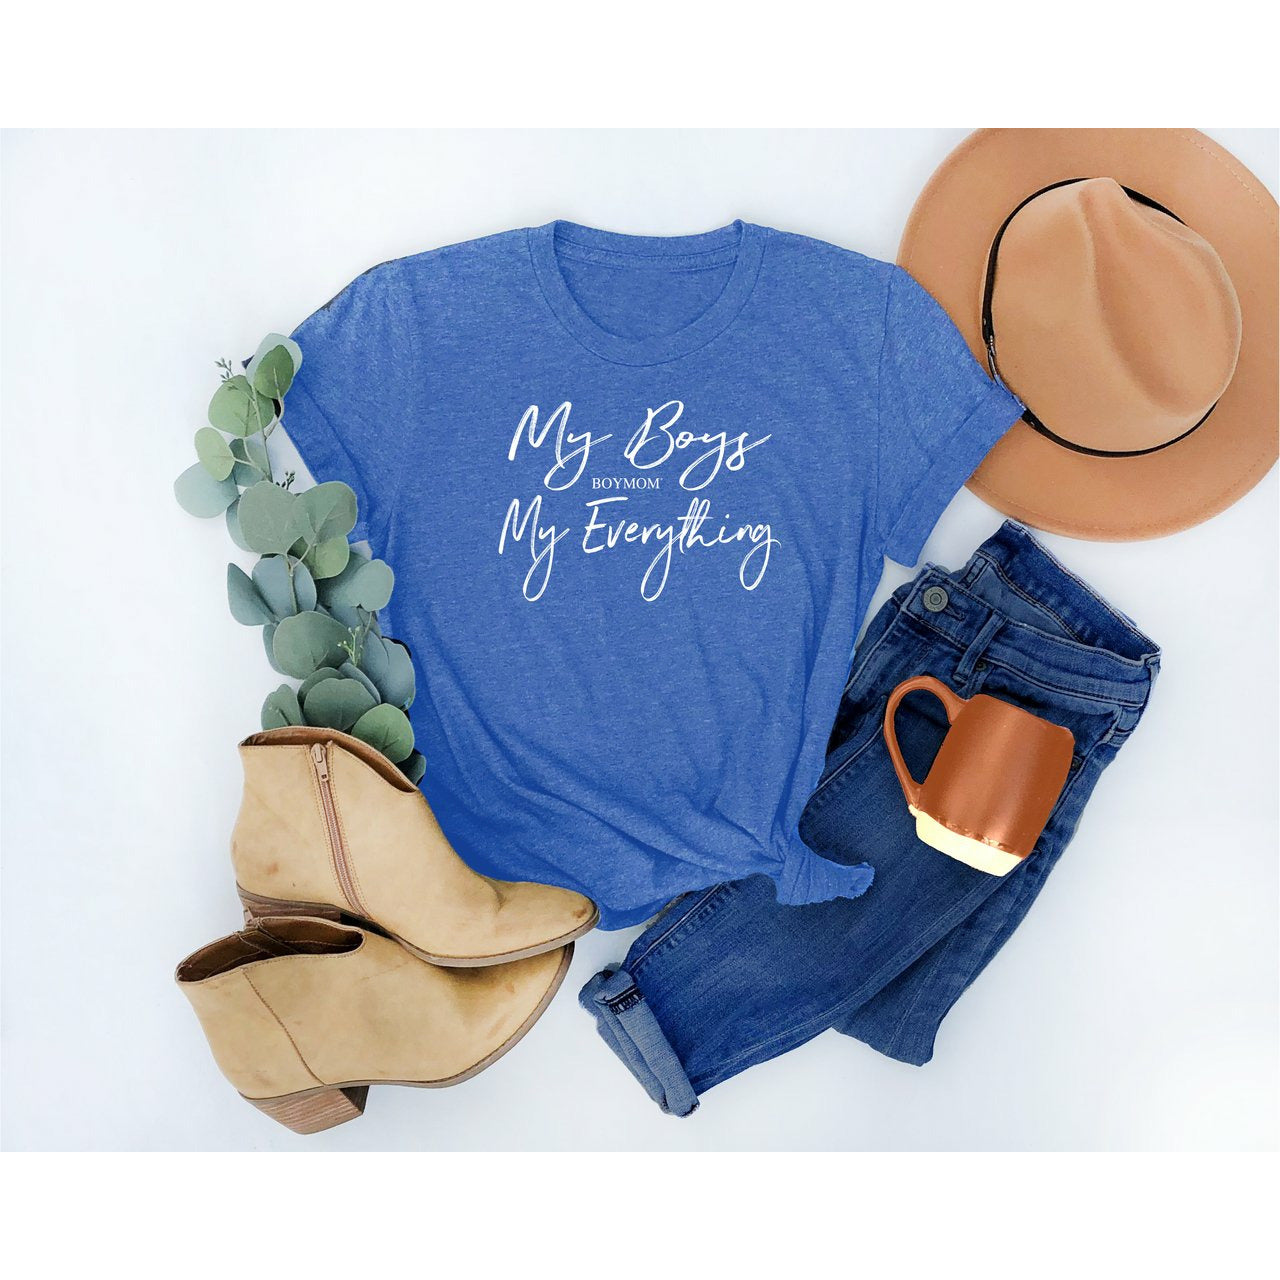 My Boys My Everything TEE - COLUMBIA BLUE (Plural)